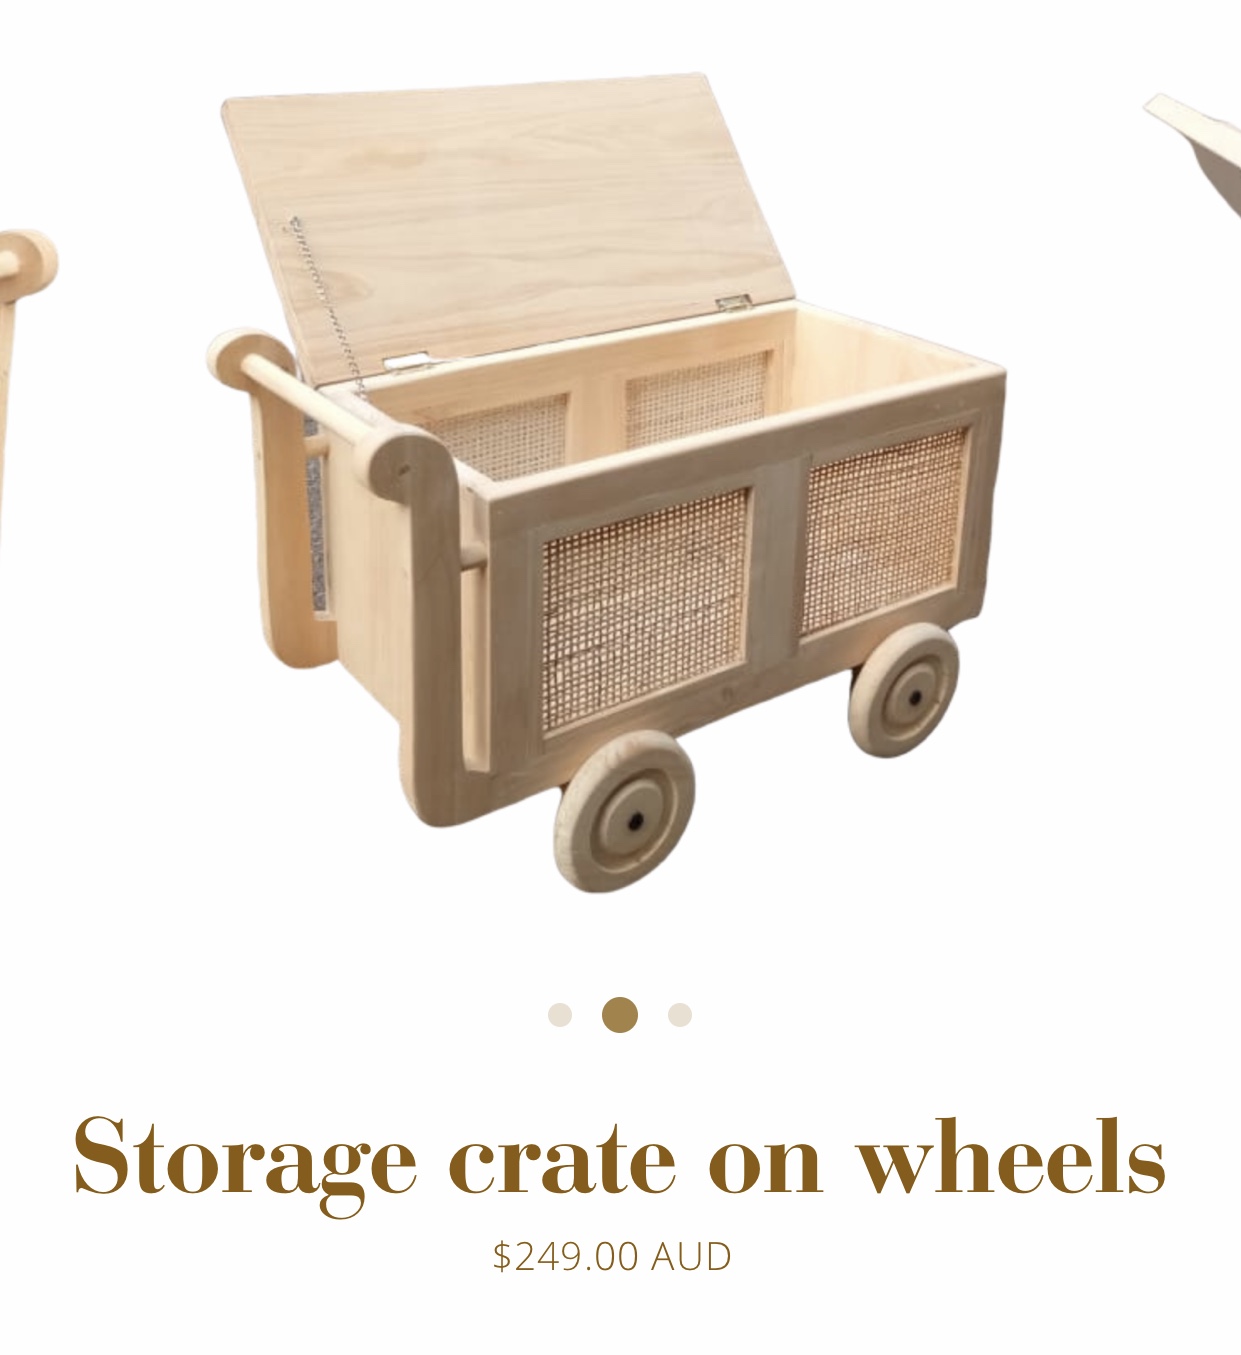 Hunter and nomad storage crate on wheels